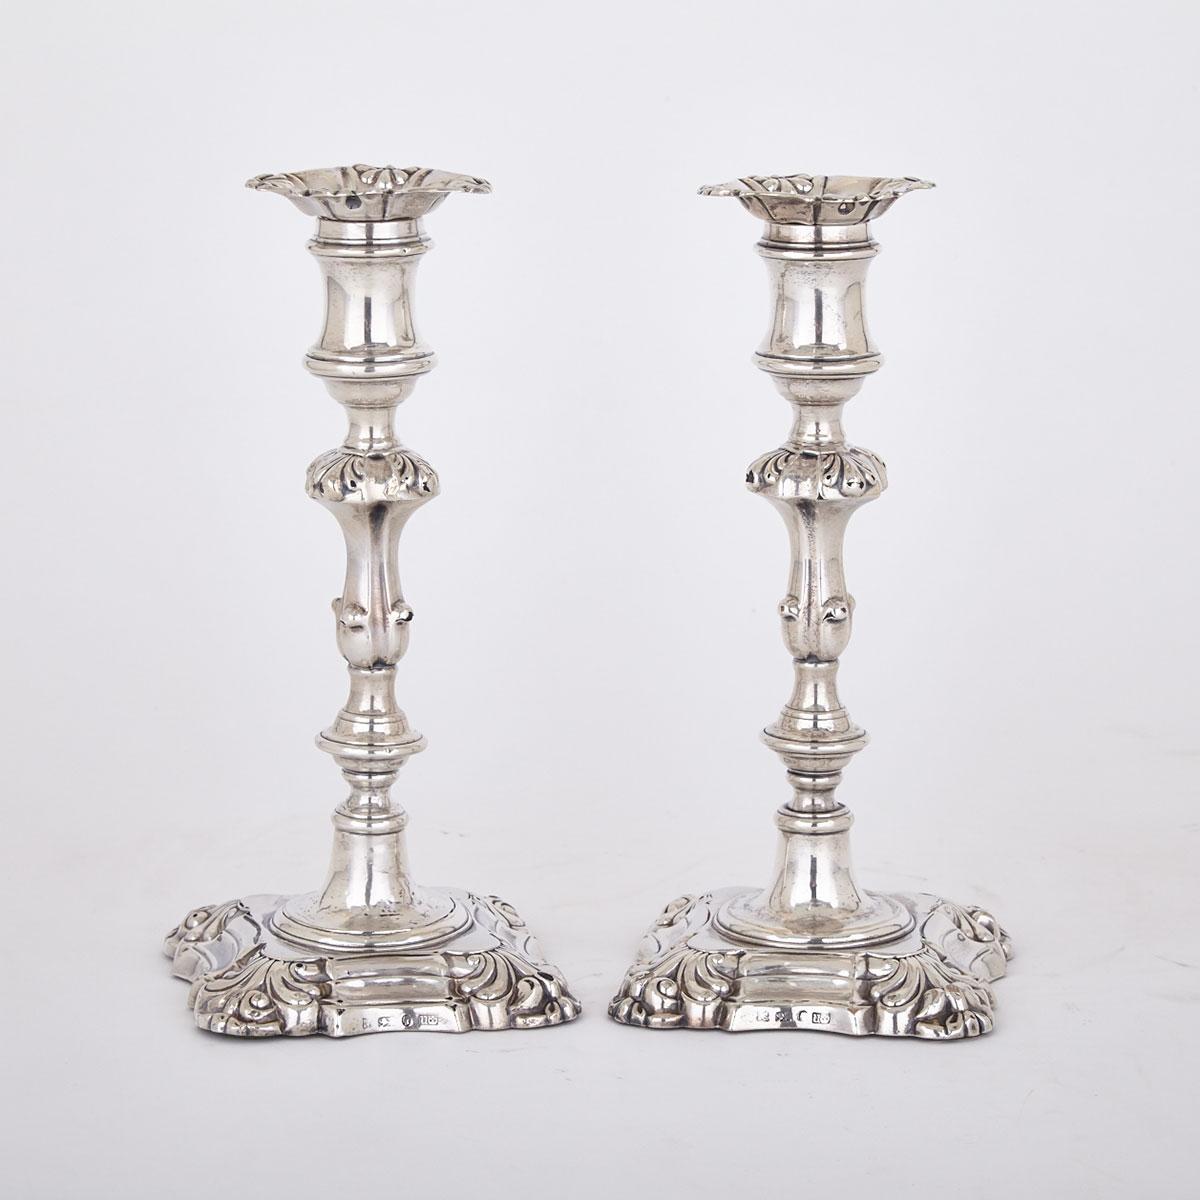 Pair of Victorian Silver Candlesticks, Henry Wilkinson & Co., Sheffield, 1840